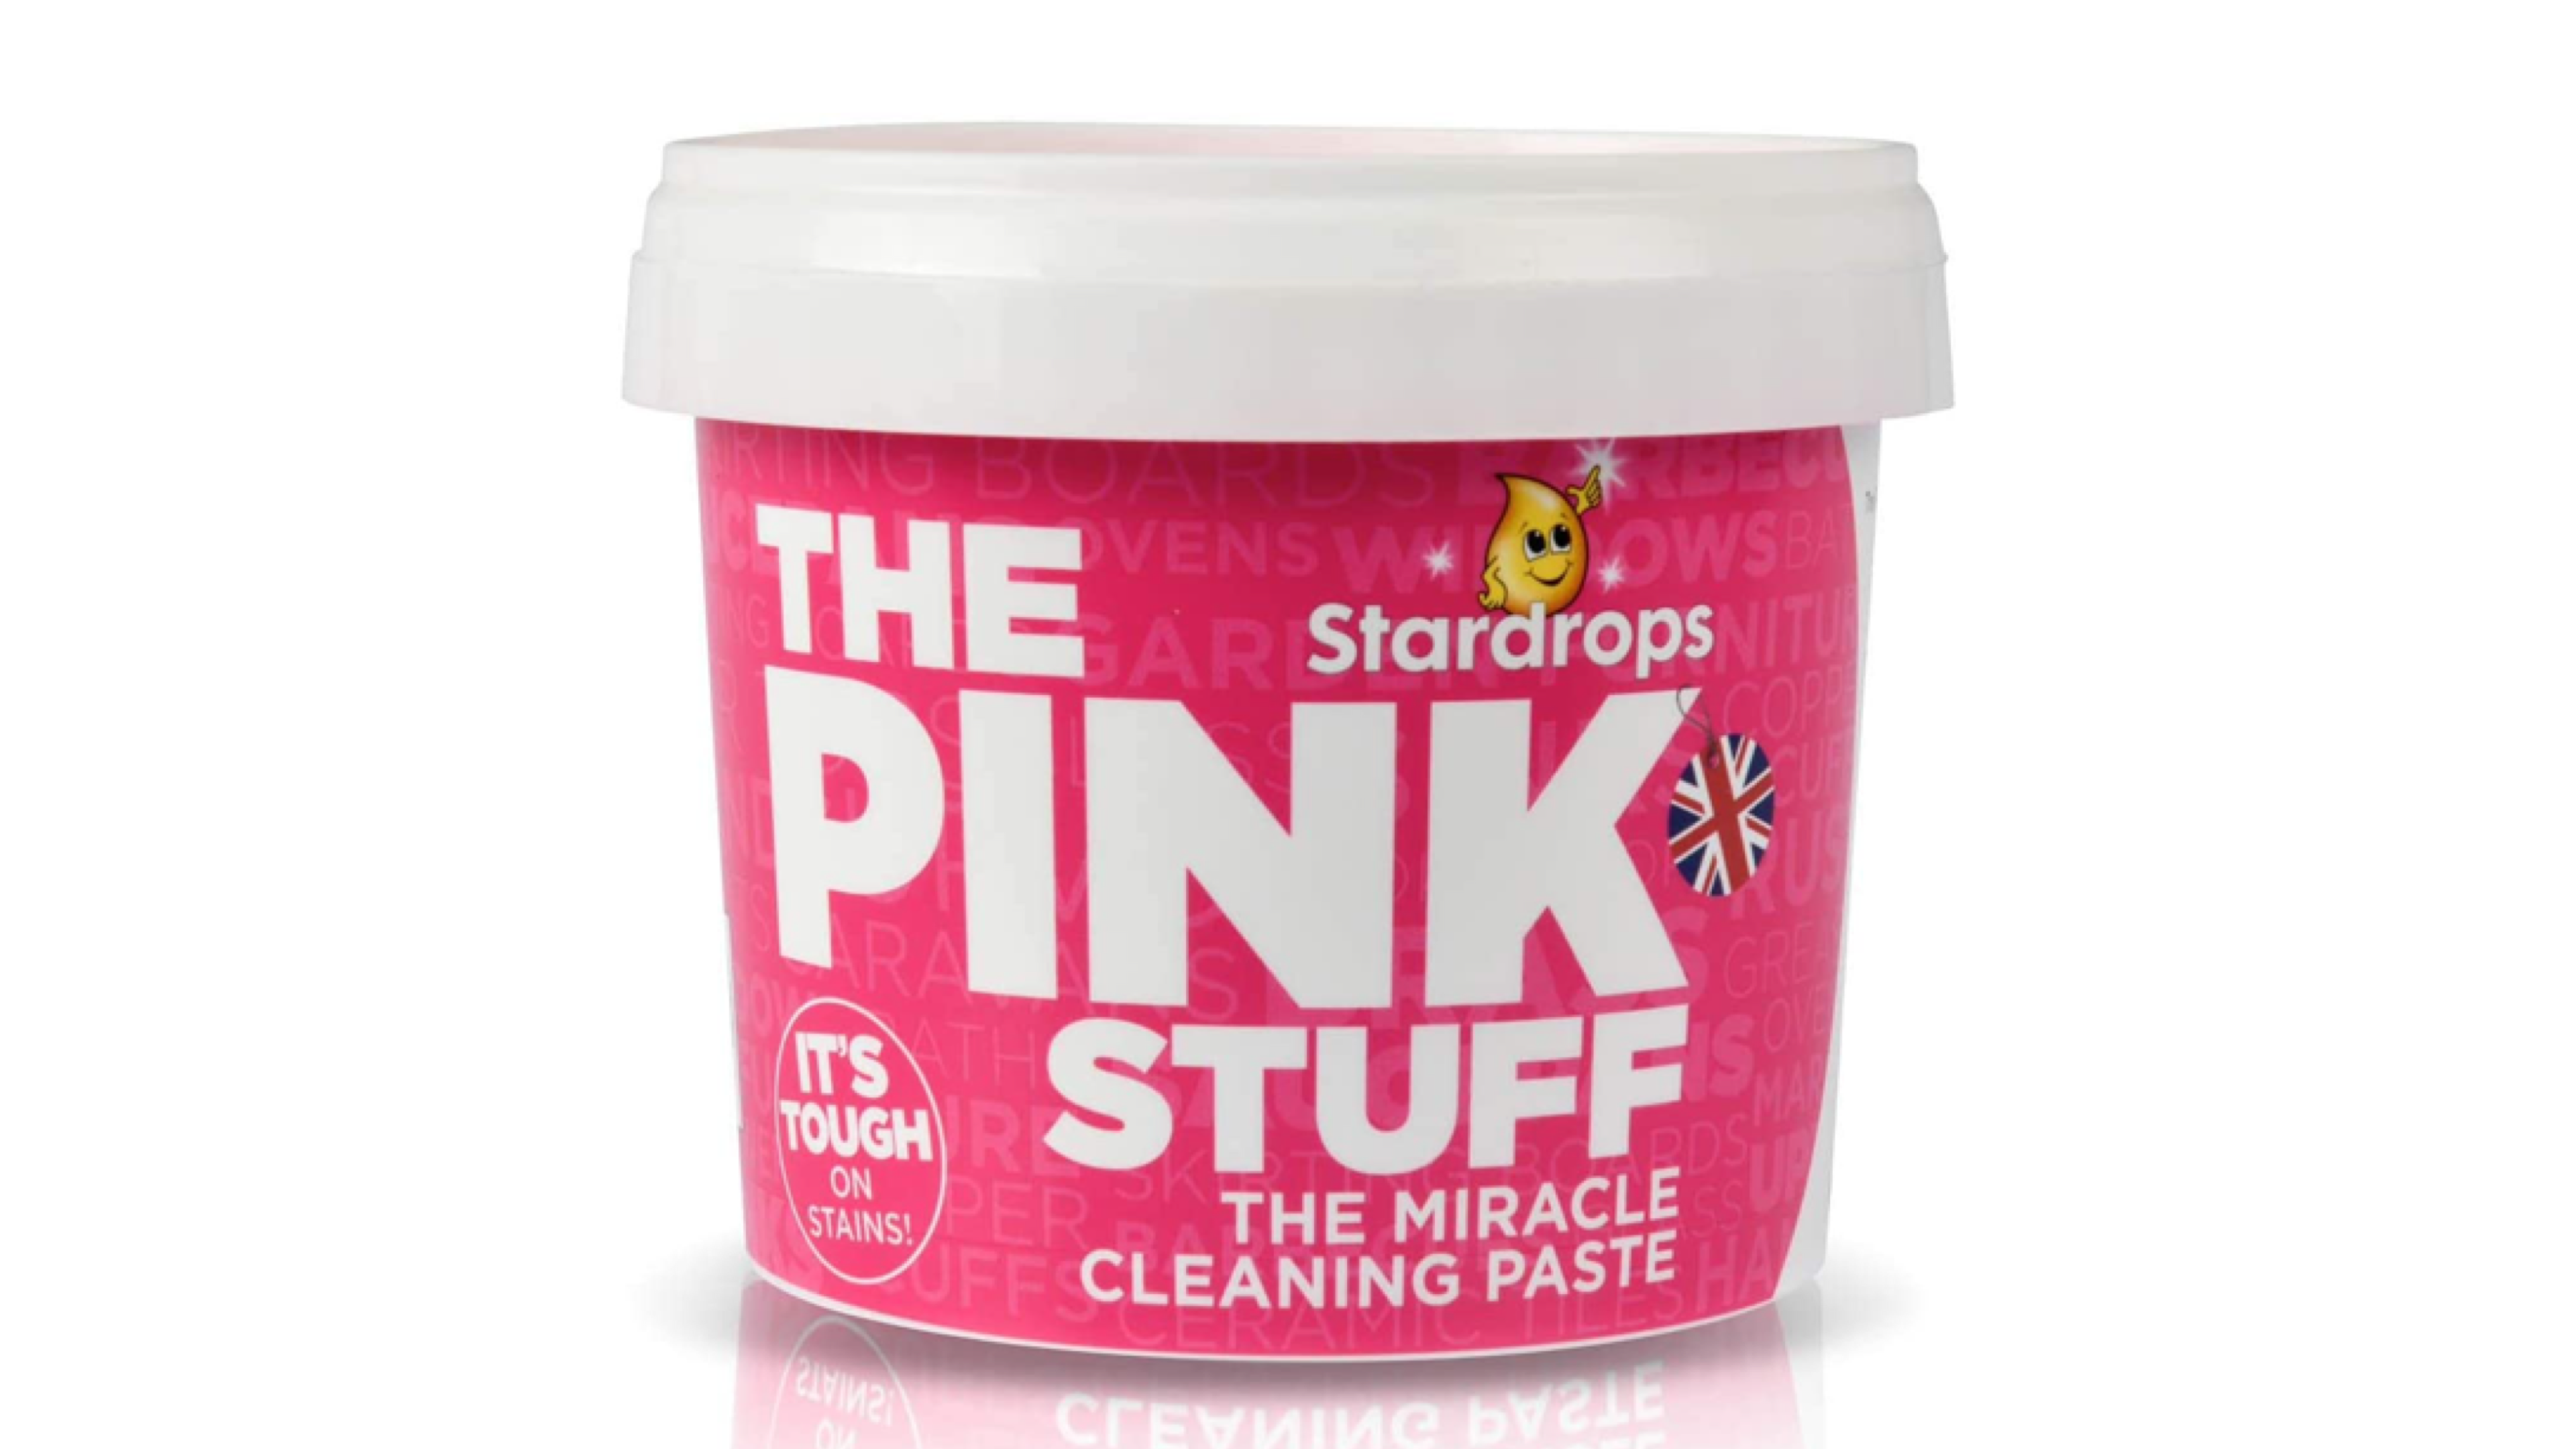 An all-purpose cleaning paste